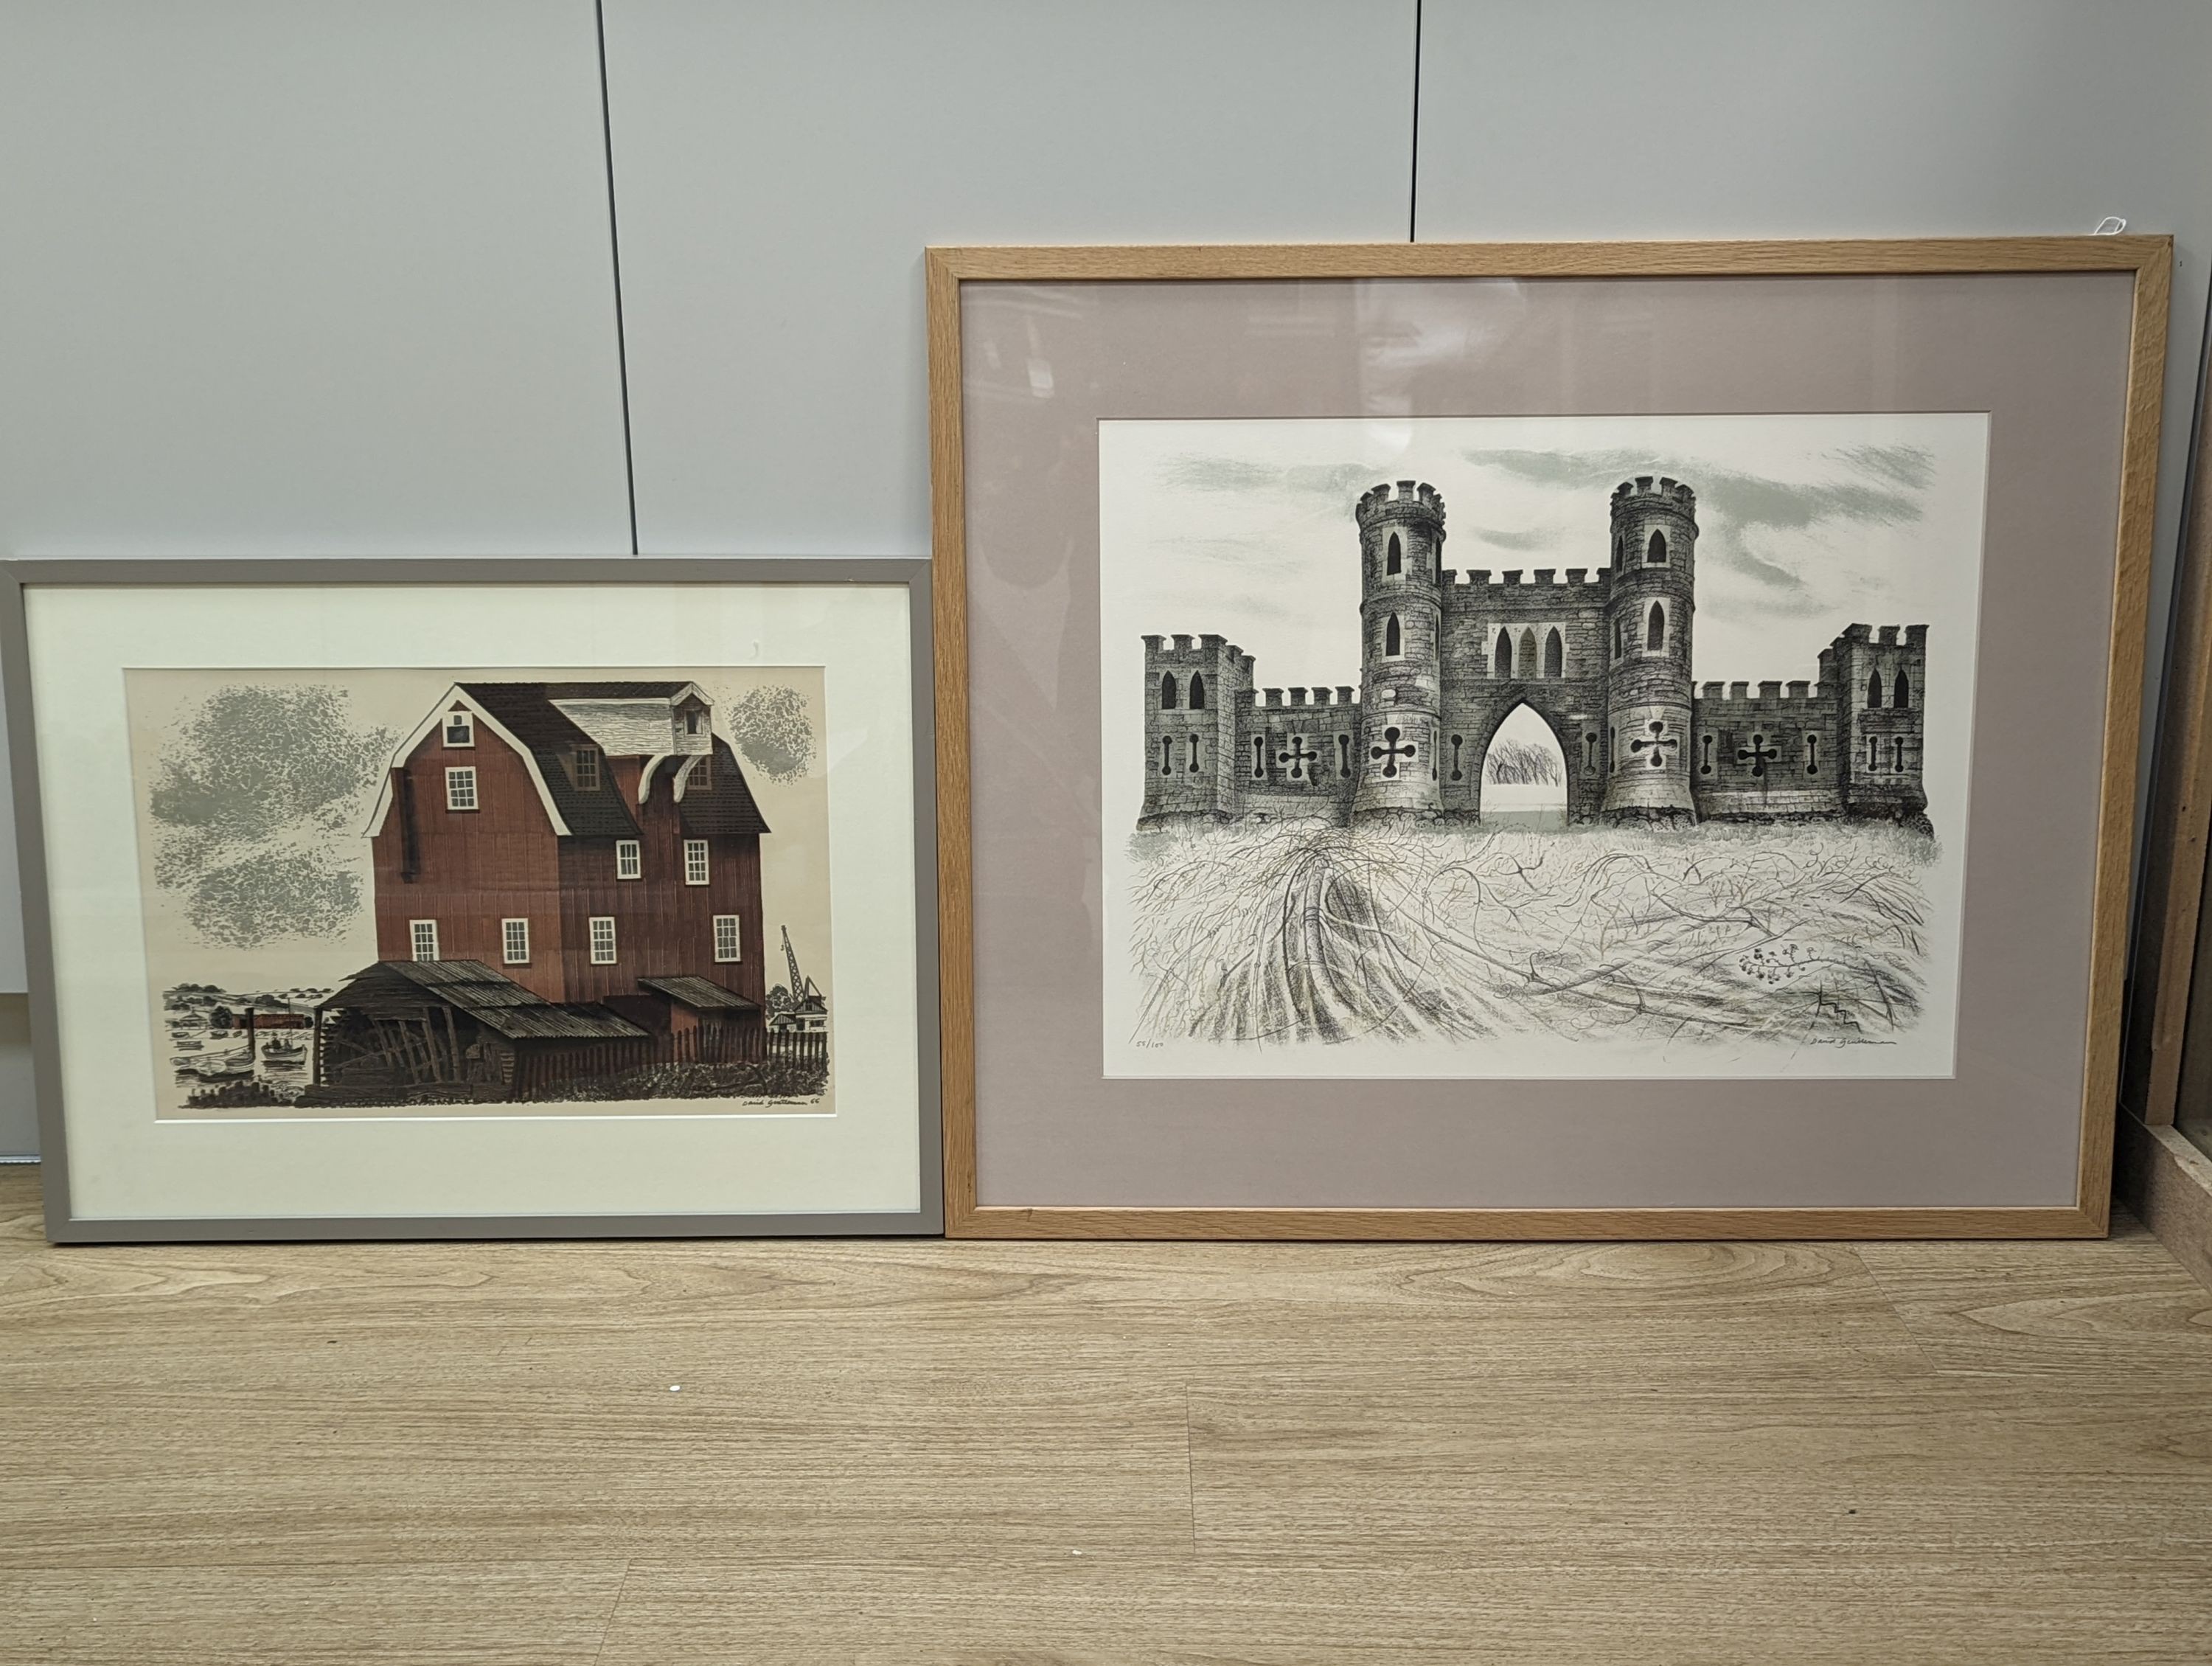 David Gentleman (b.1930), two lithographs, Sham Castle, 55/100 and Woodbridge Tidemill, both signed in pencil, largest 43 x 55cm